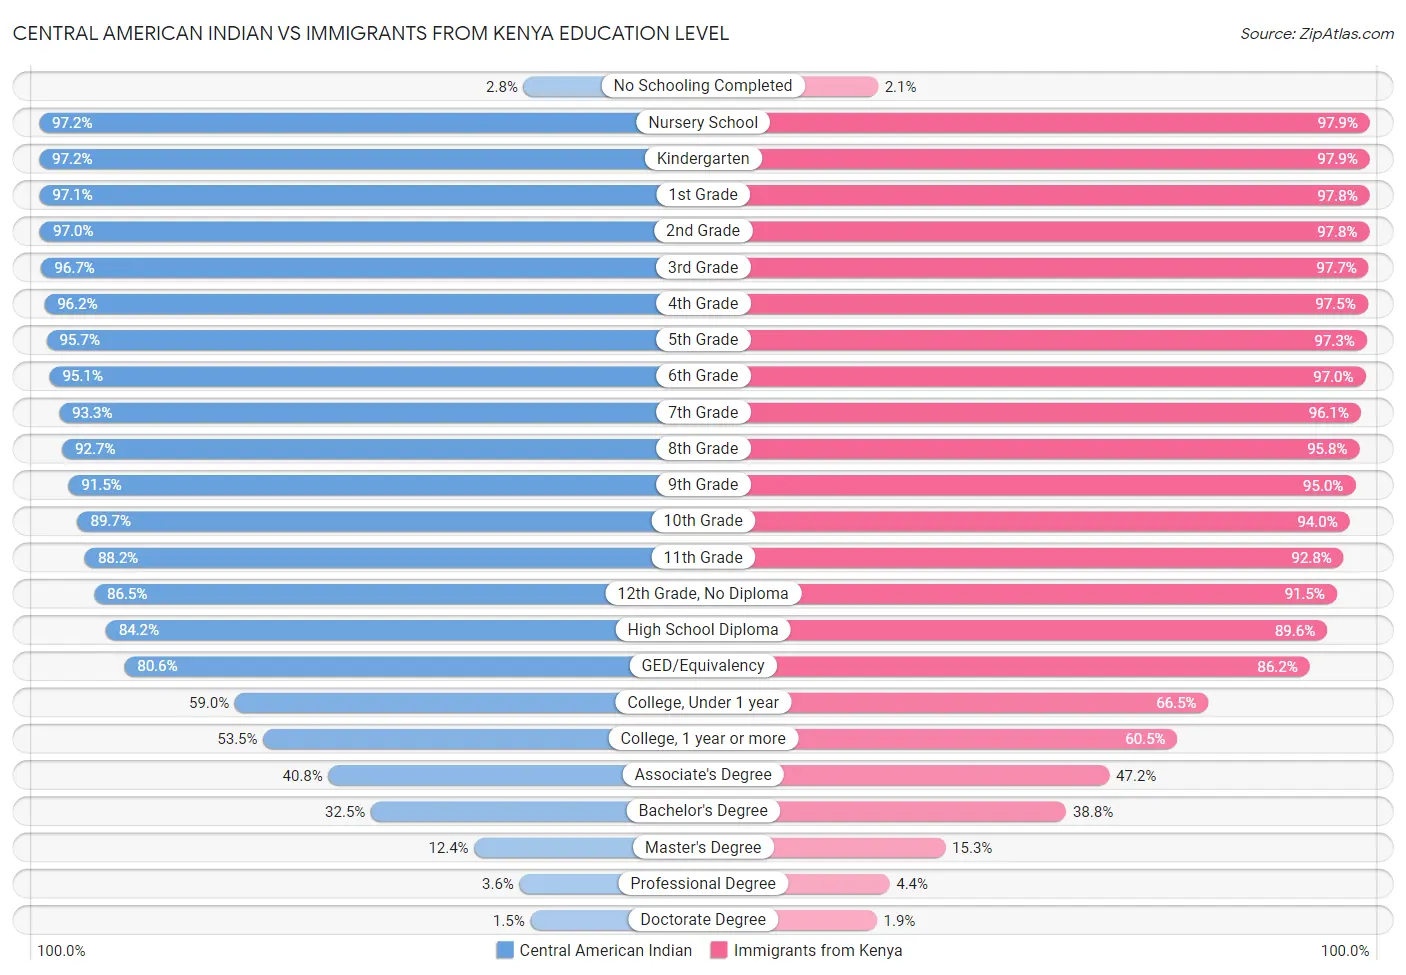 Central American Indian vs Immigrants from Kenya Education Level